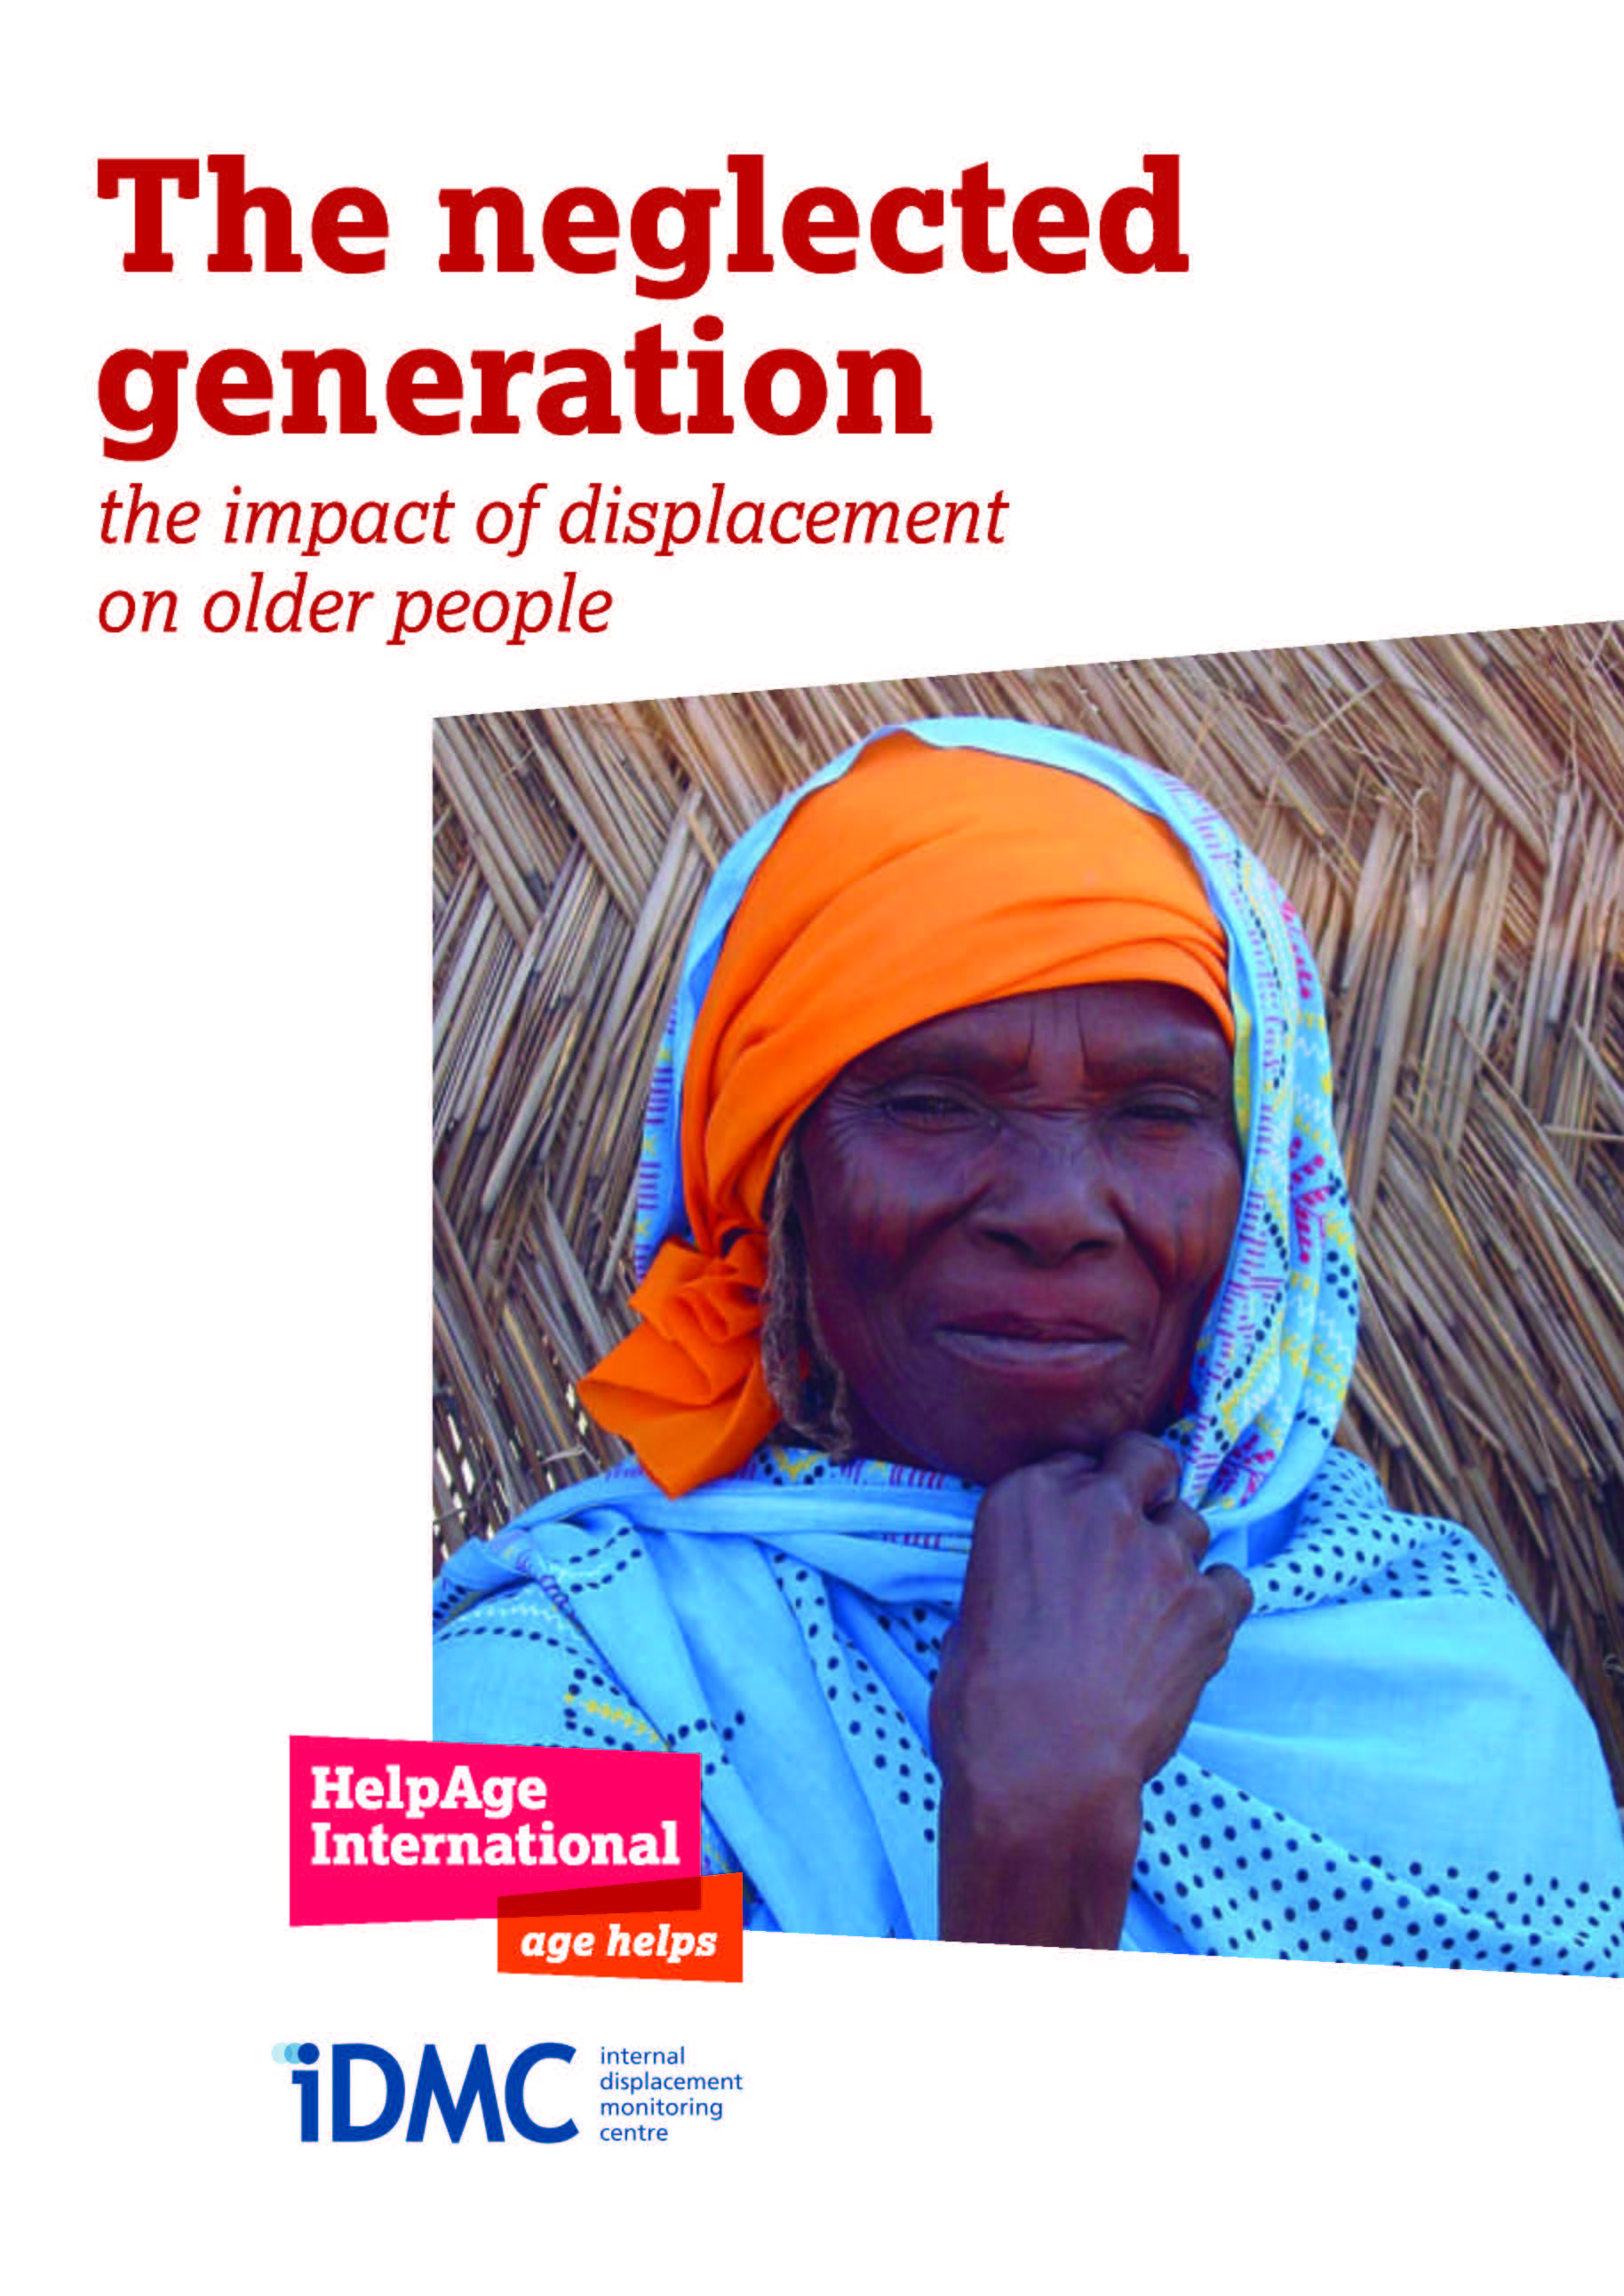 The neglected generation: the impact of displacement on older people